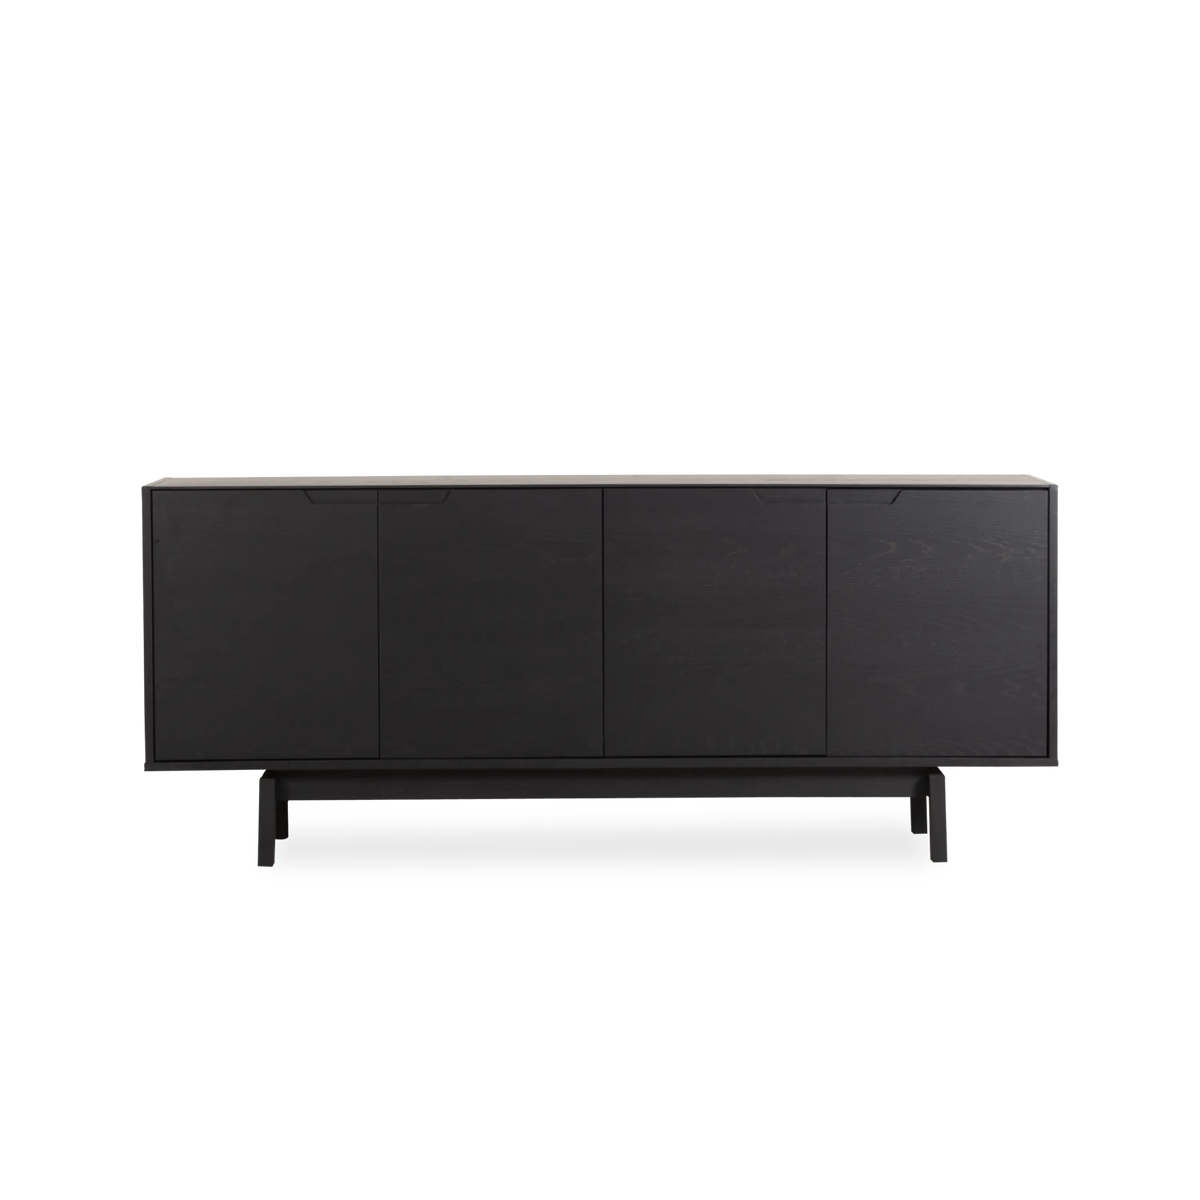 Crisp clean lines create a simplistic form with the Beaumont Sideboard.